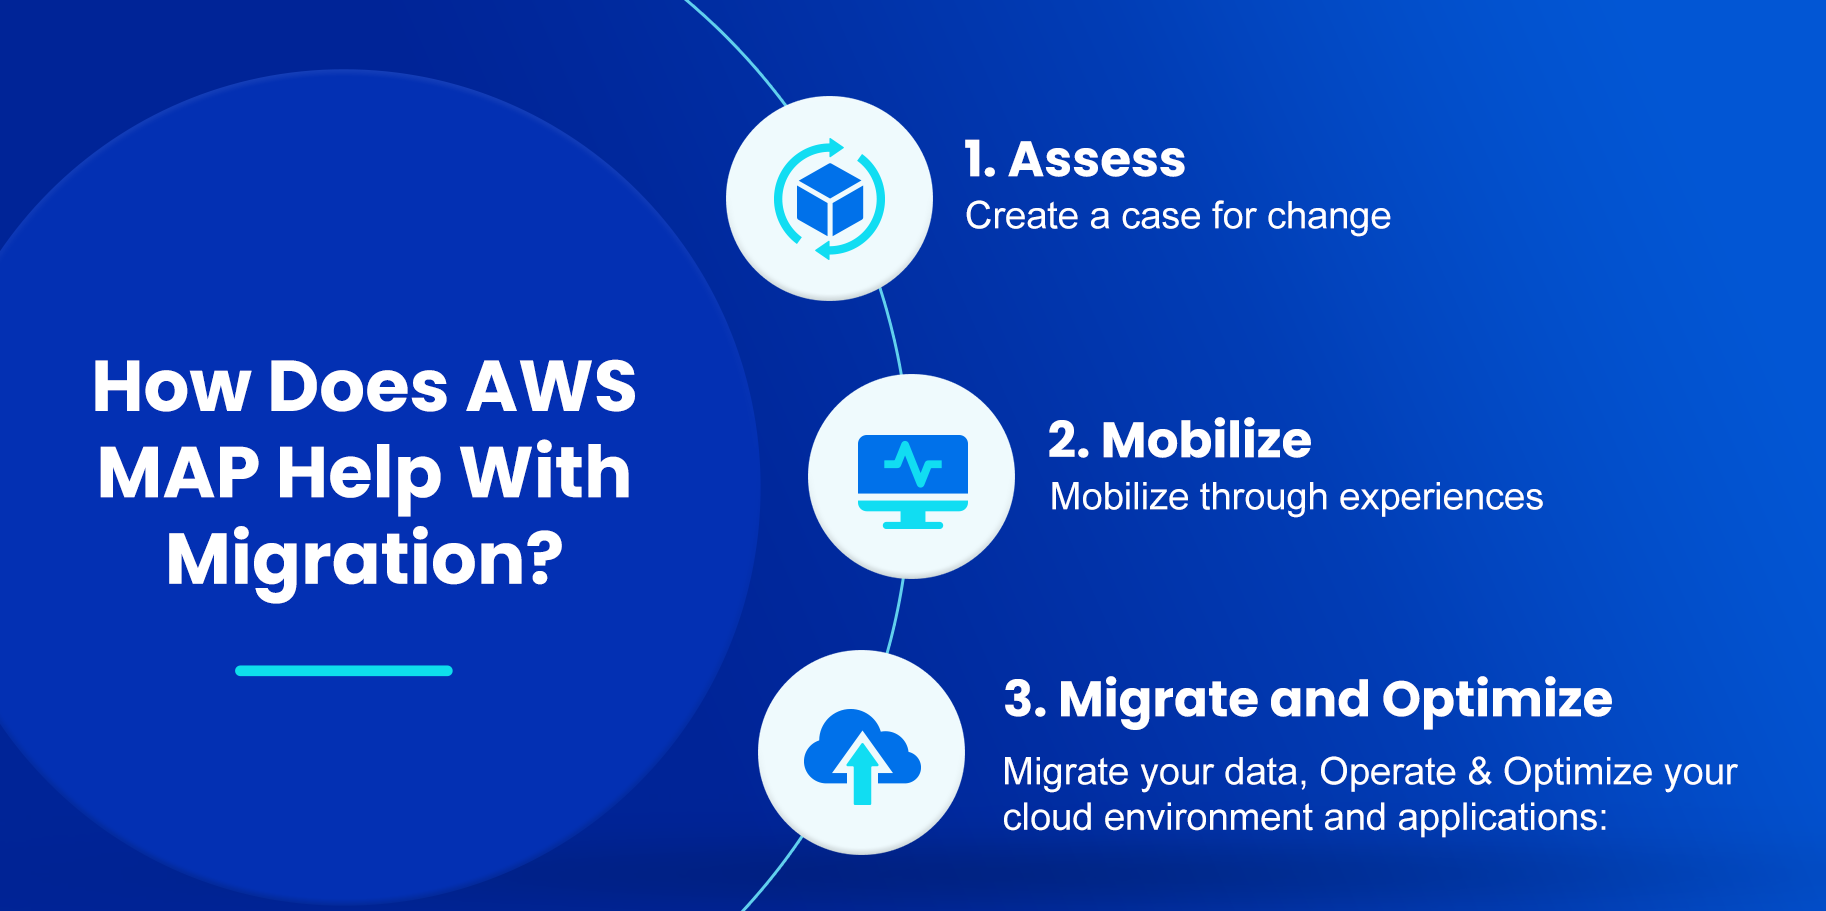 How does AWS MAP help with migration